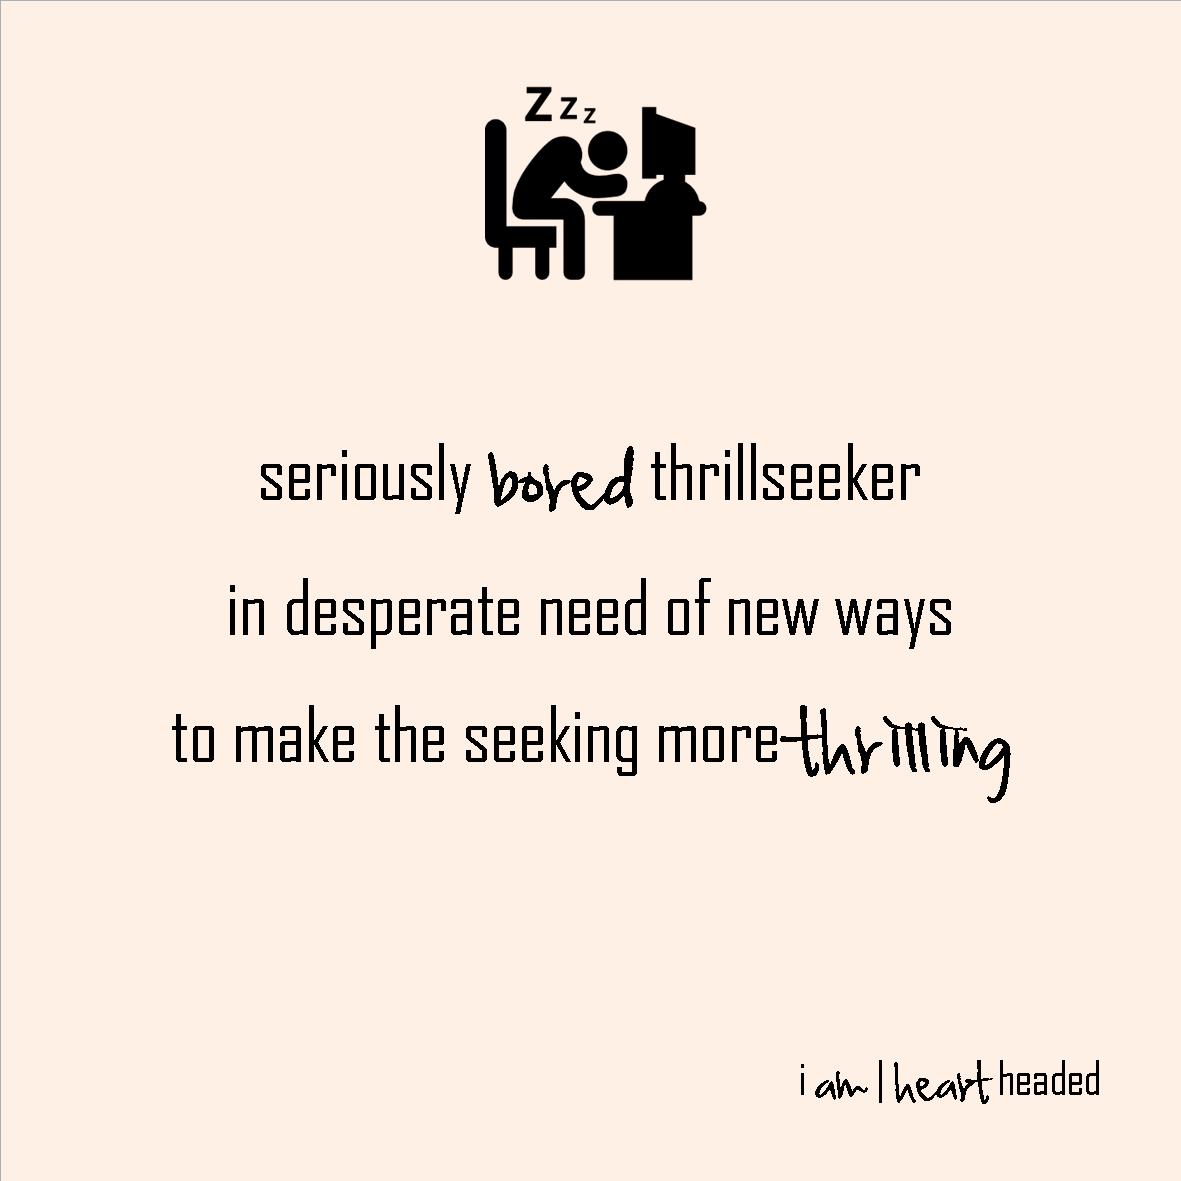 full-size featured image of quote 'bored thrillseeker' in category 'wacky' at i am | heart headed